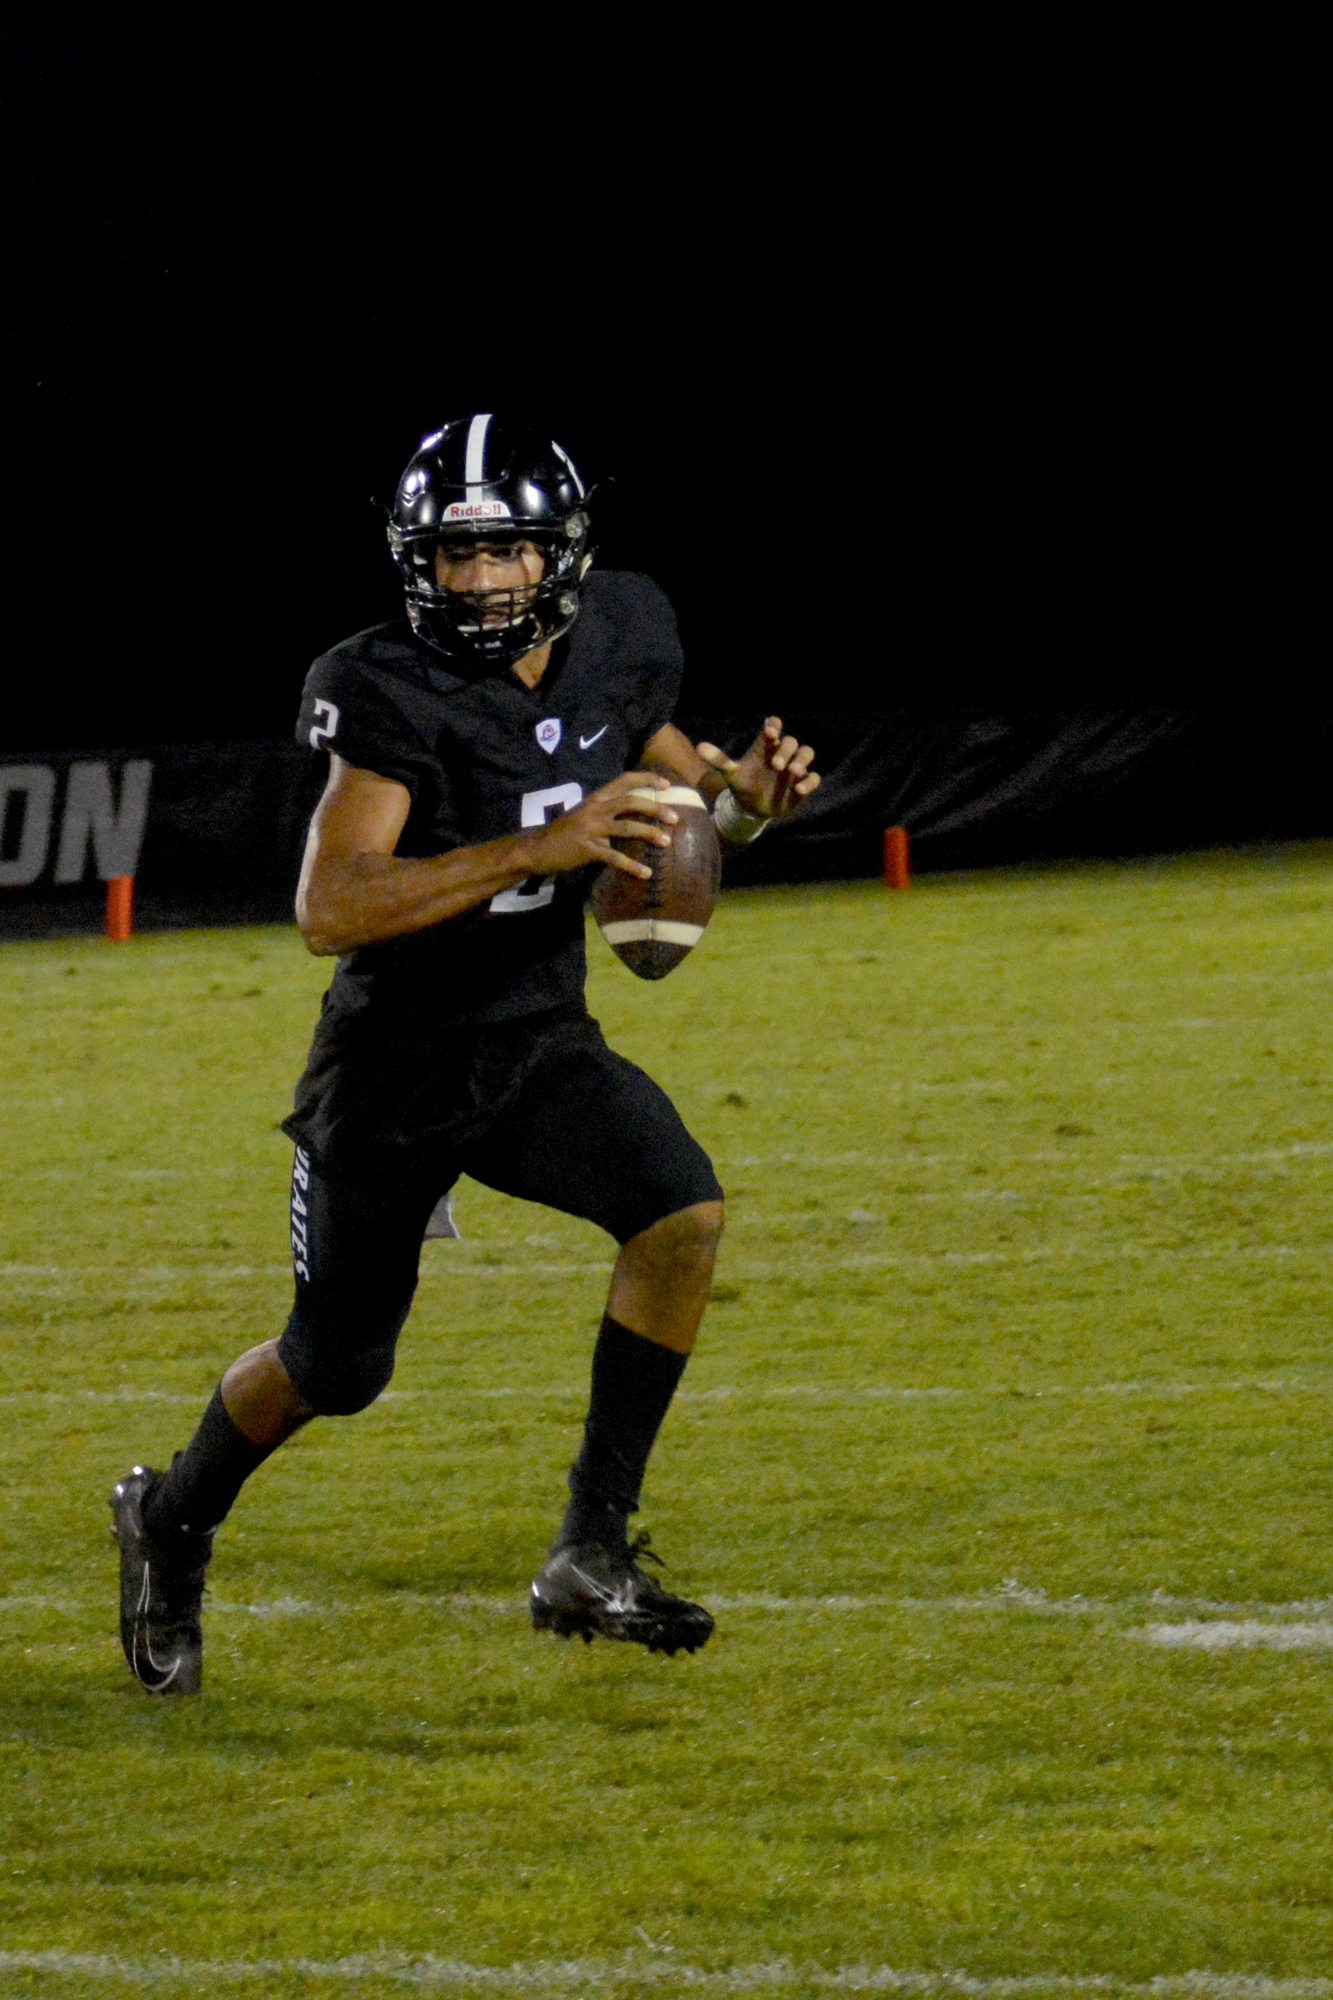 Braden River quarterback Shawqi Itraish finished with 274 passing yards and two rushing touchdowns against Riverview.